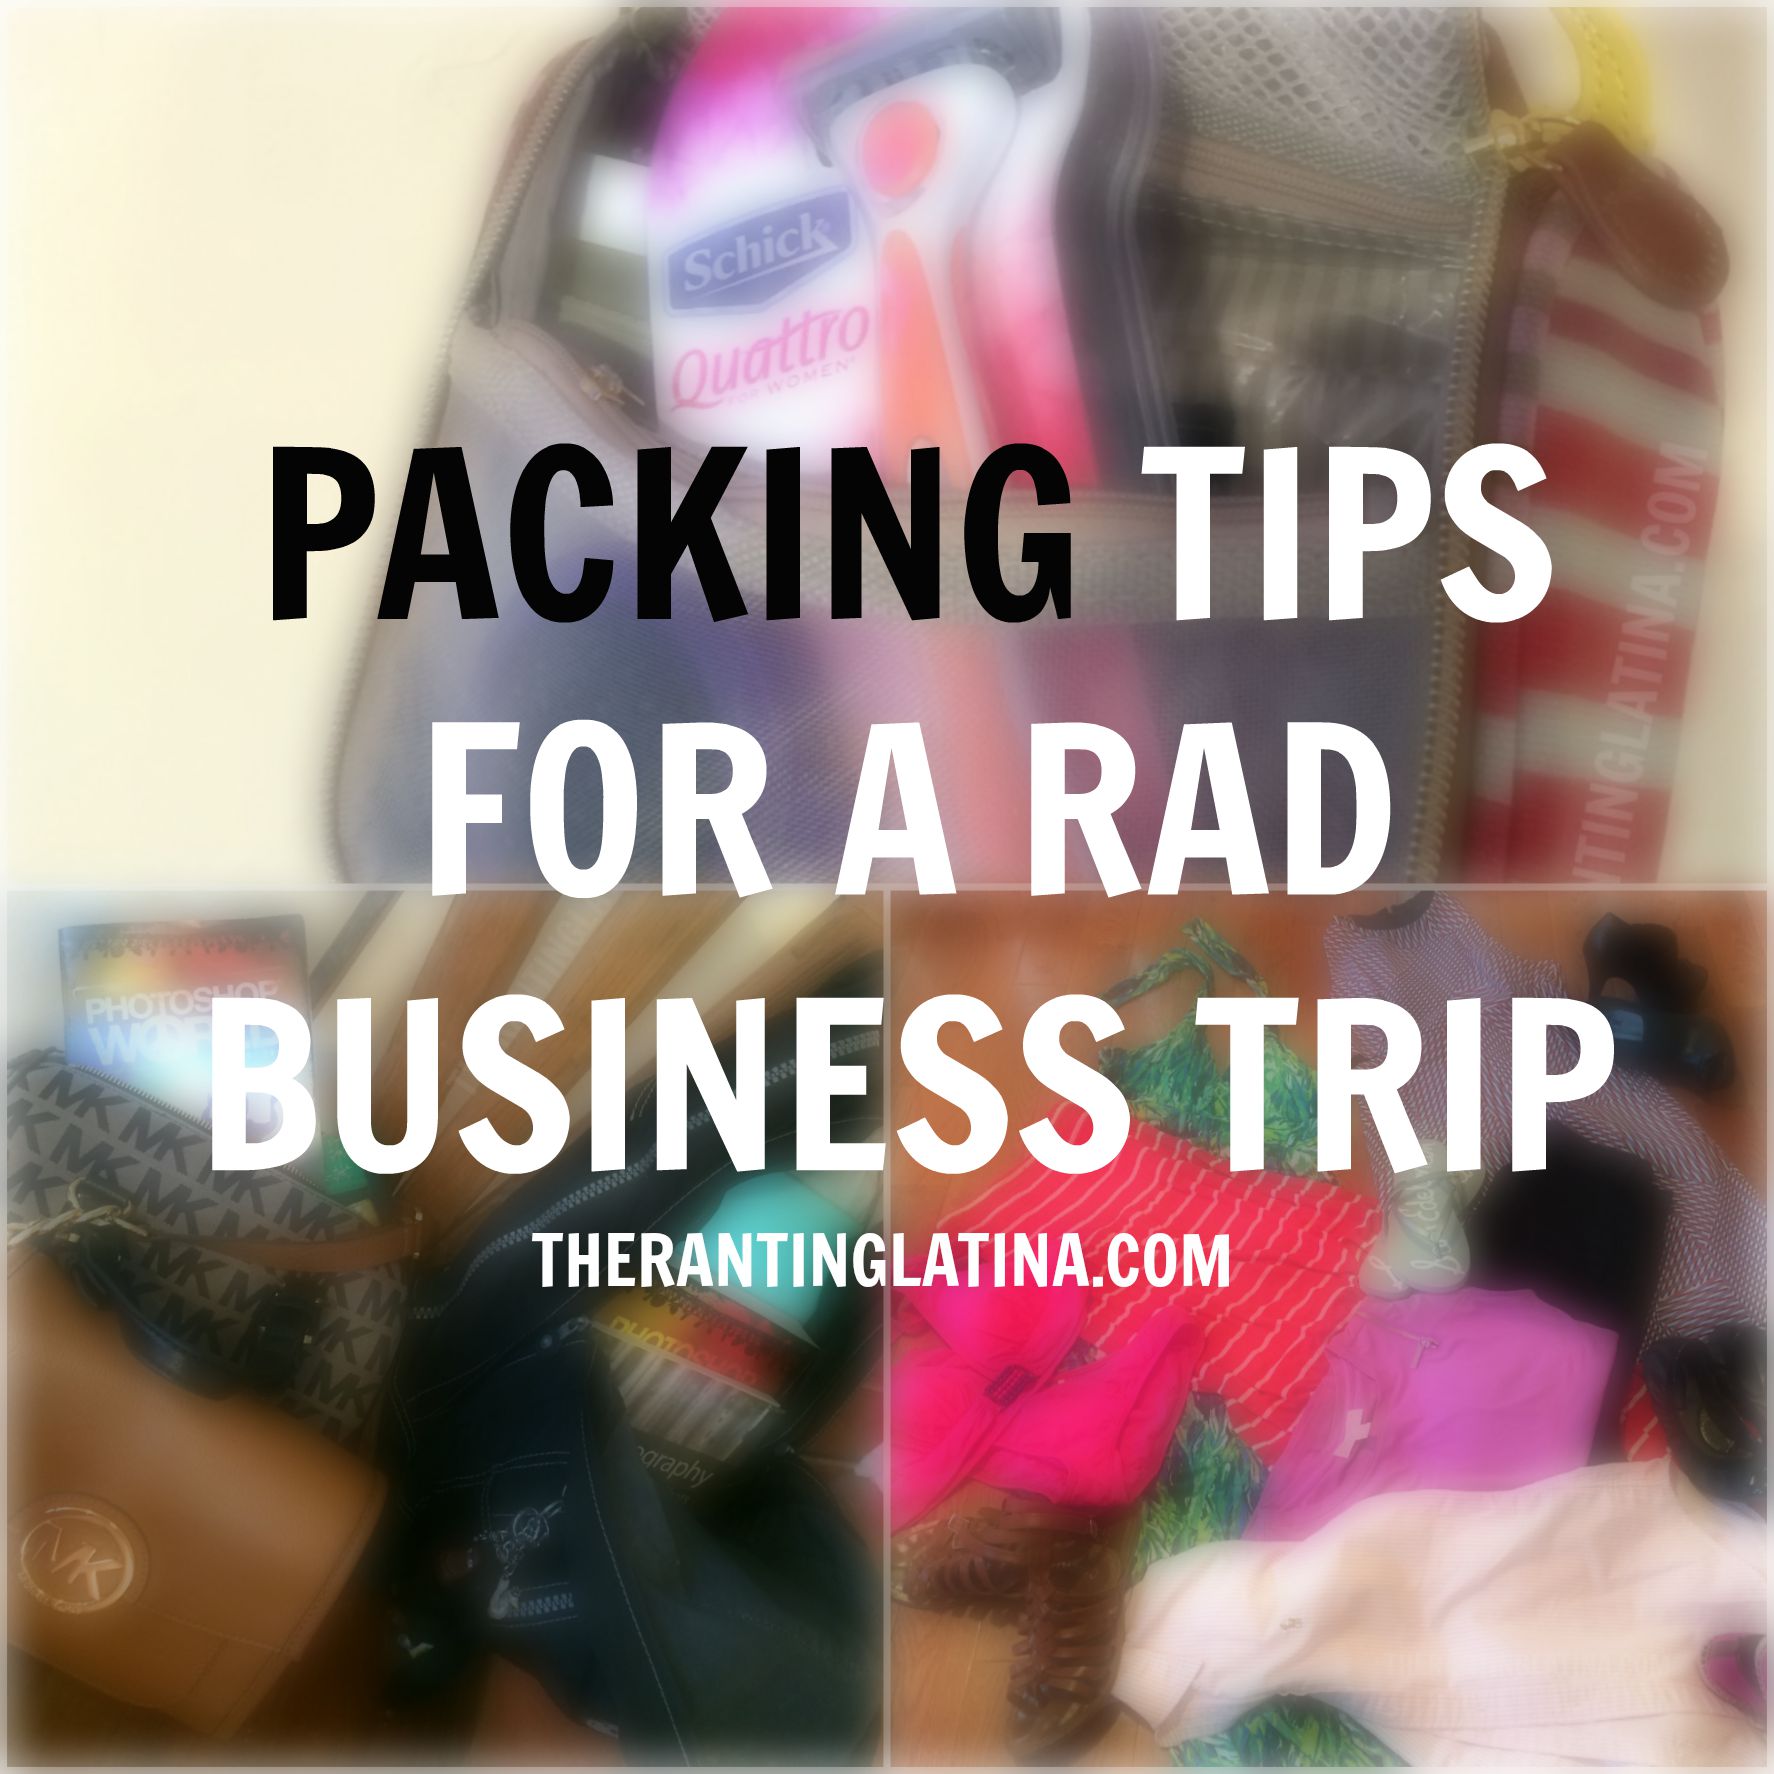 Packing Trips for A Rad Business Trip